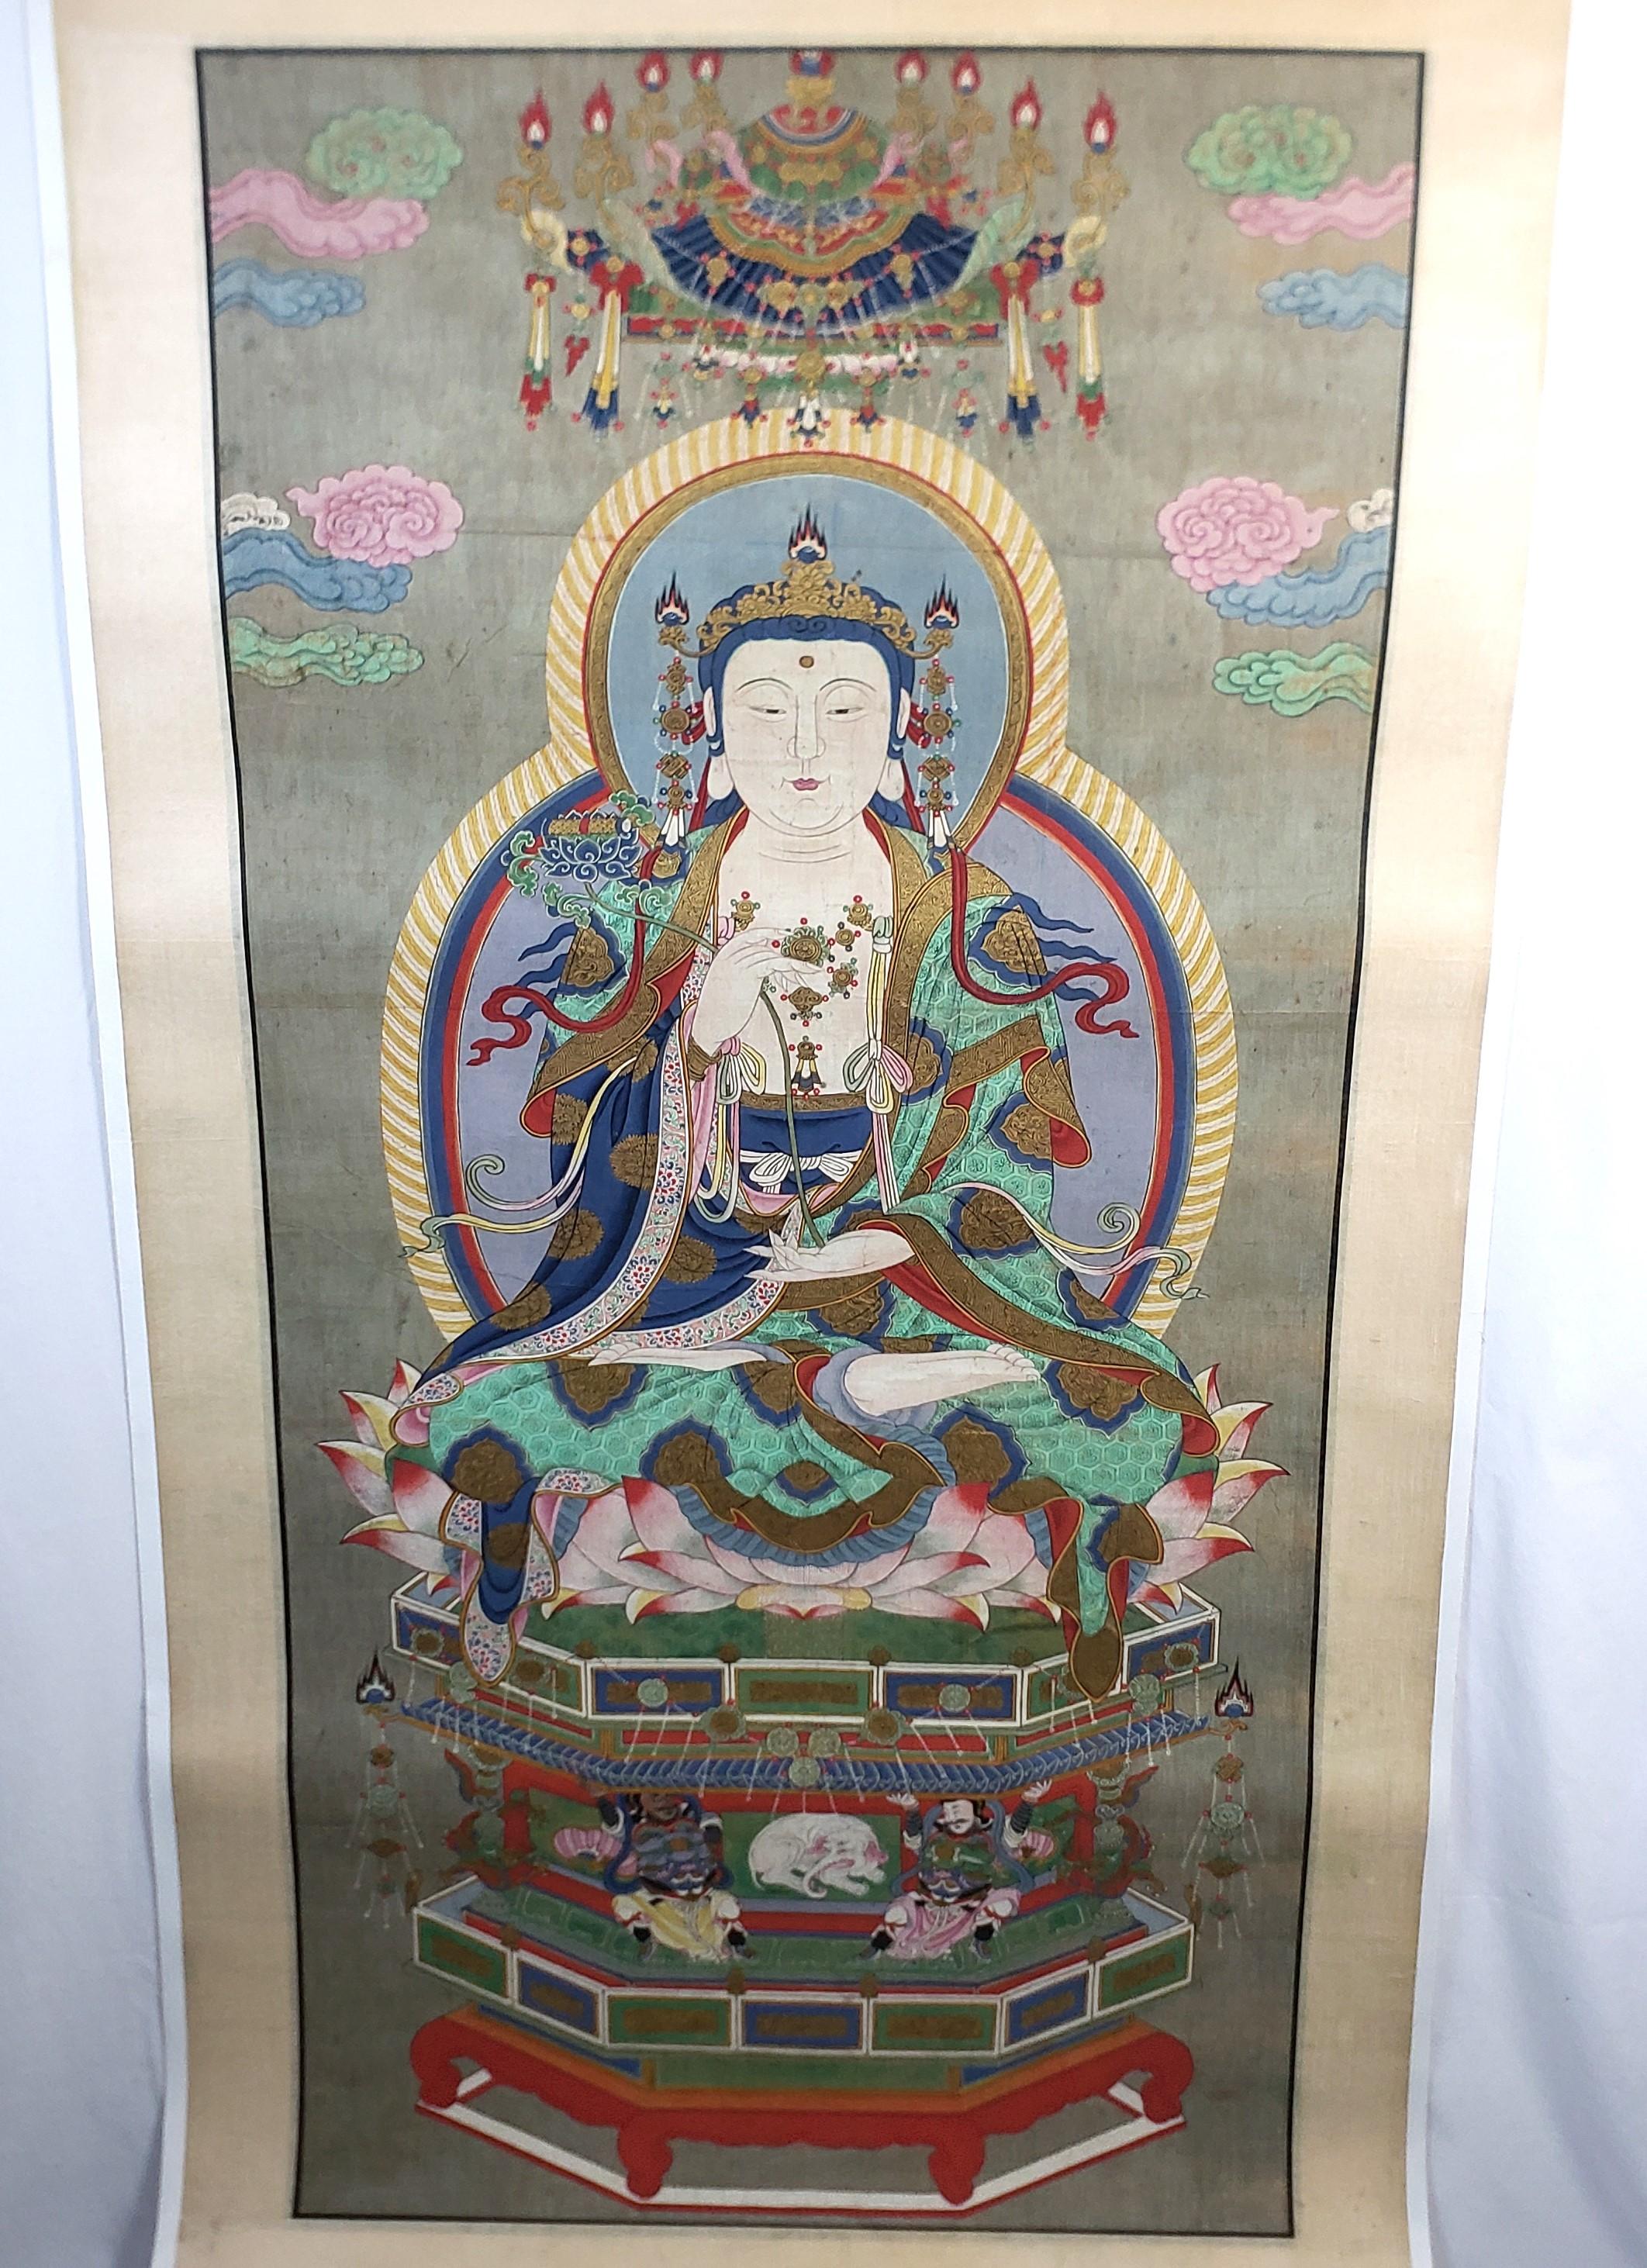 This large antique scroll is unsigned and presumed to have originated from China and date to approximately 1860 and done in the period Qing Dynasty style. The scroll is hand painted on silk which has been professionally mounted on thick white linen